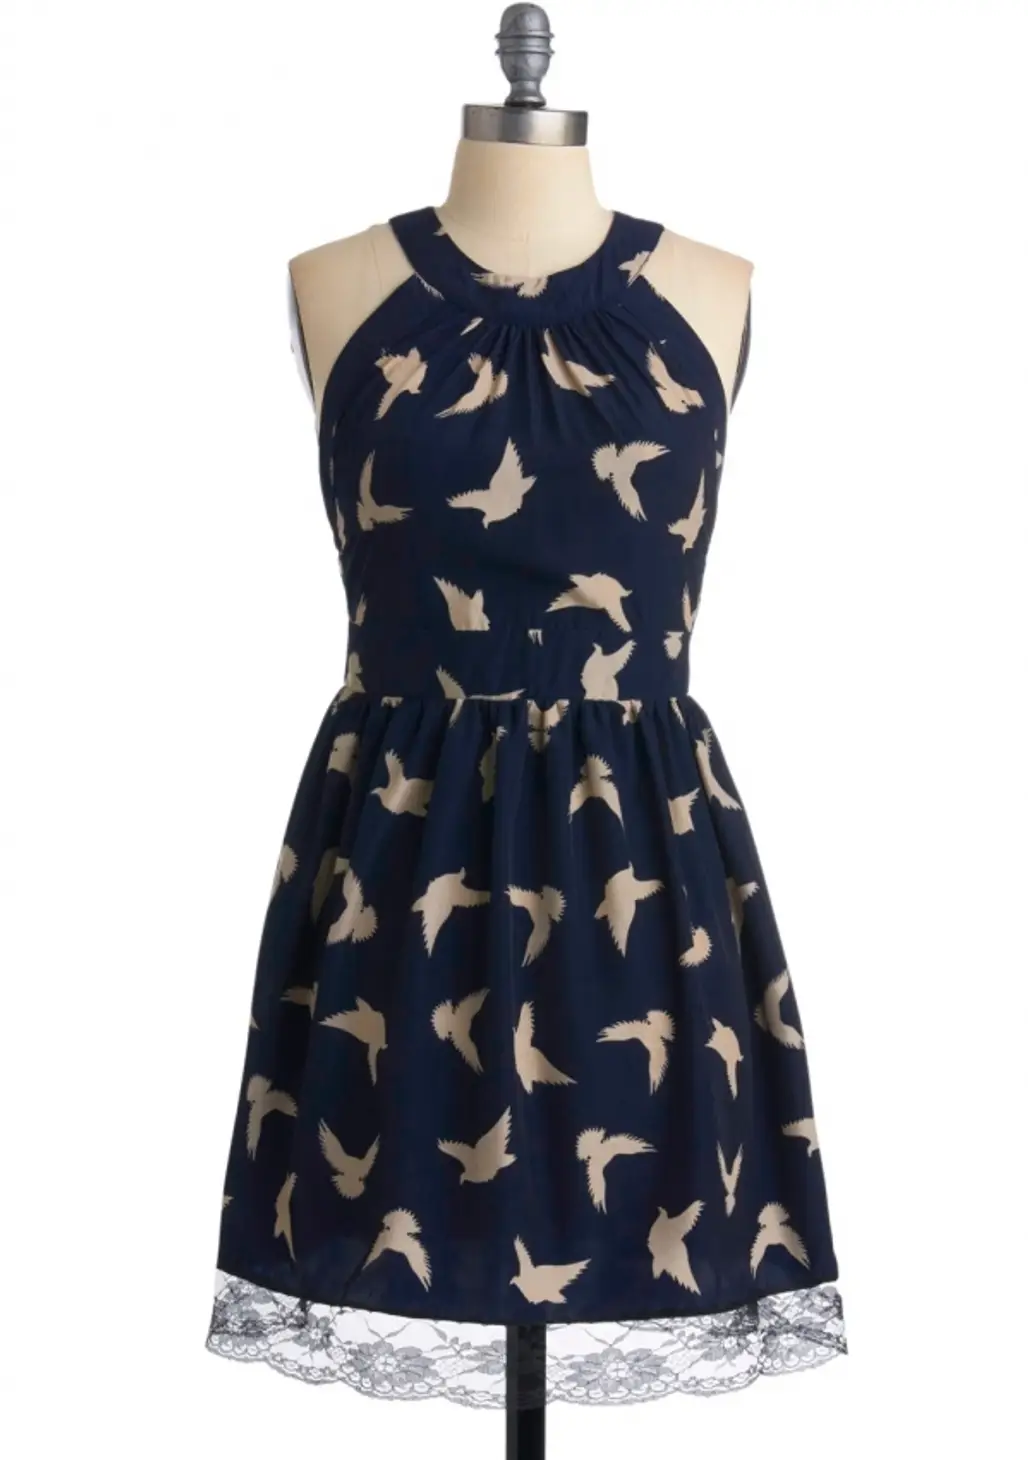 Modcloth – Wing It on